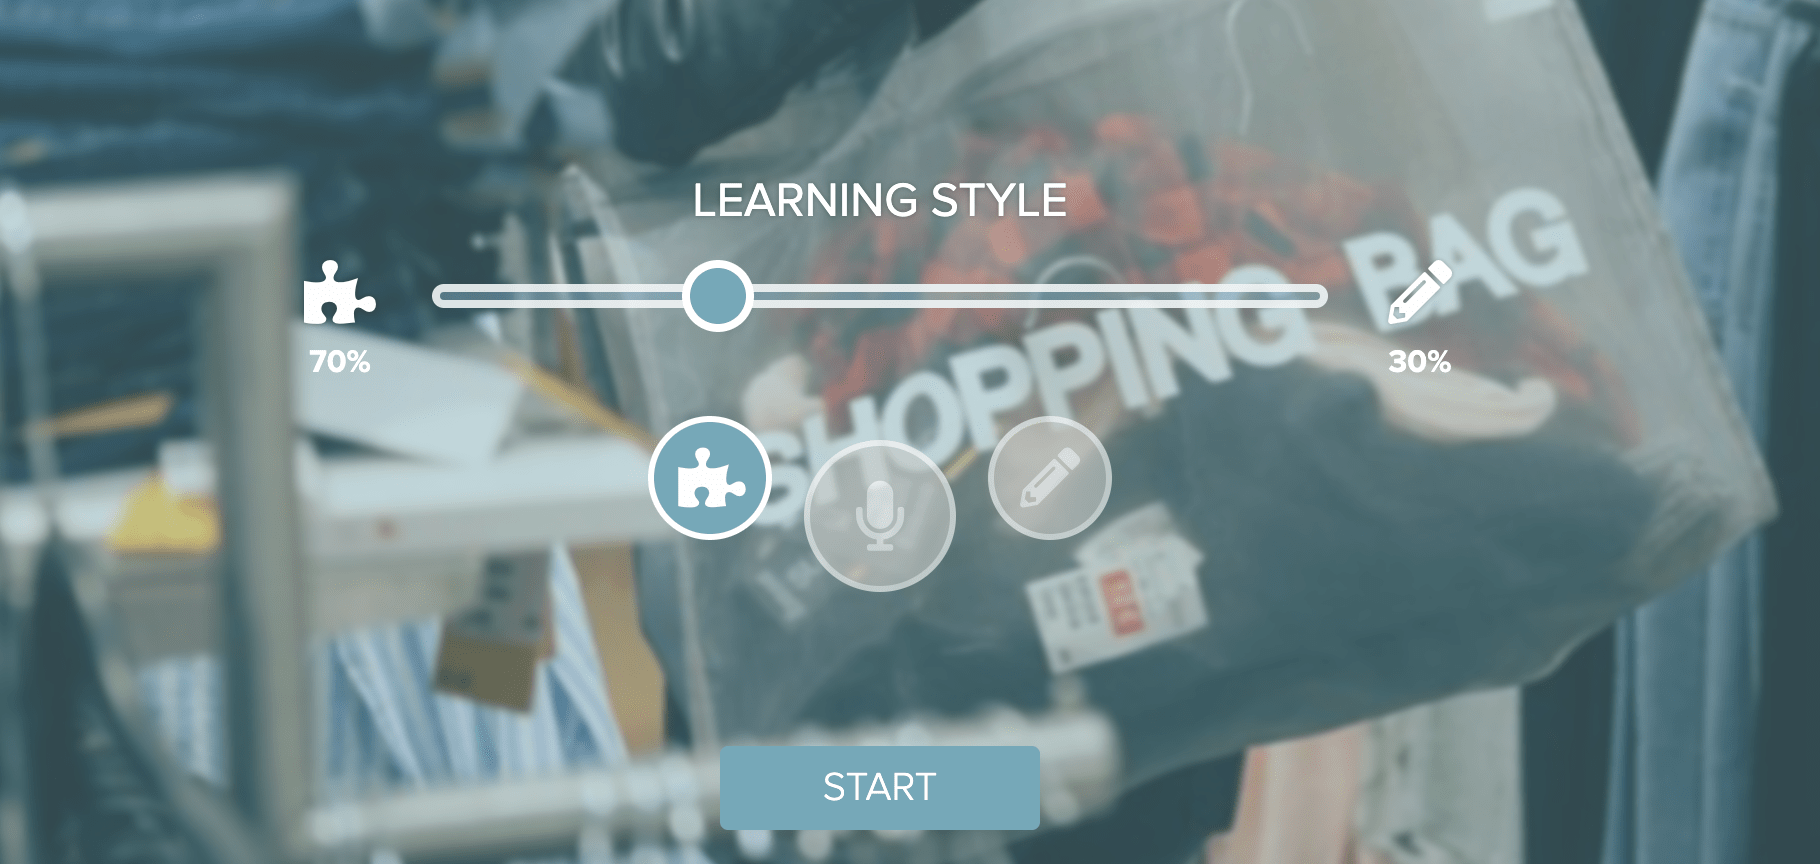 Reactored learning style slider suitable for learners of all levels